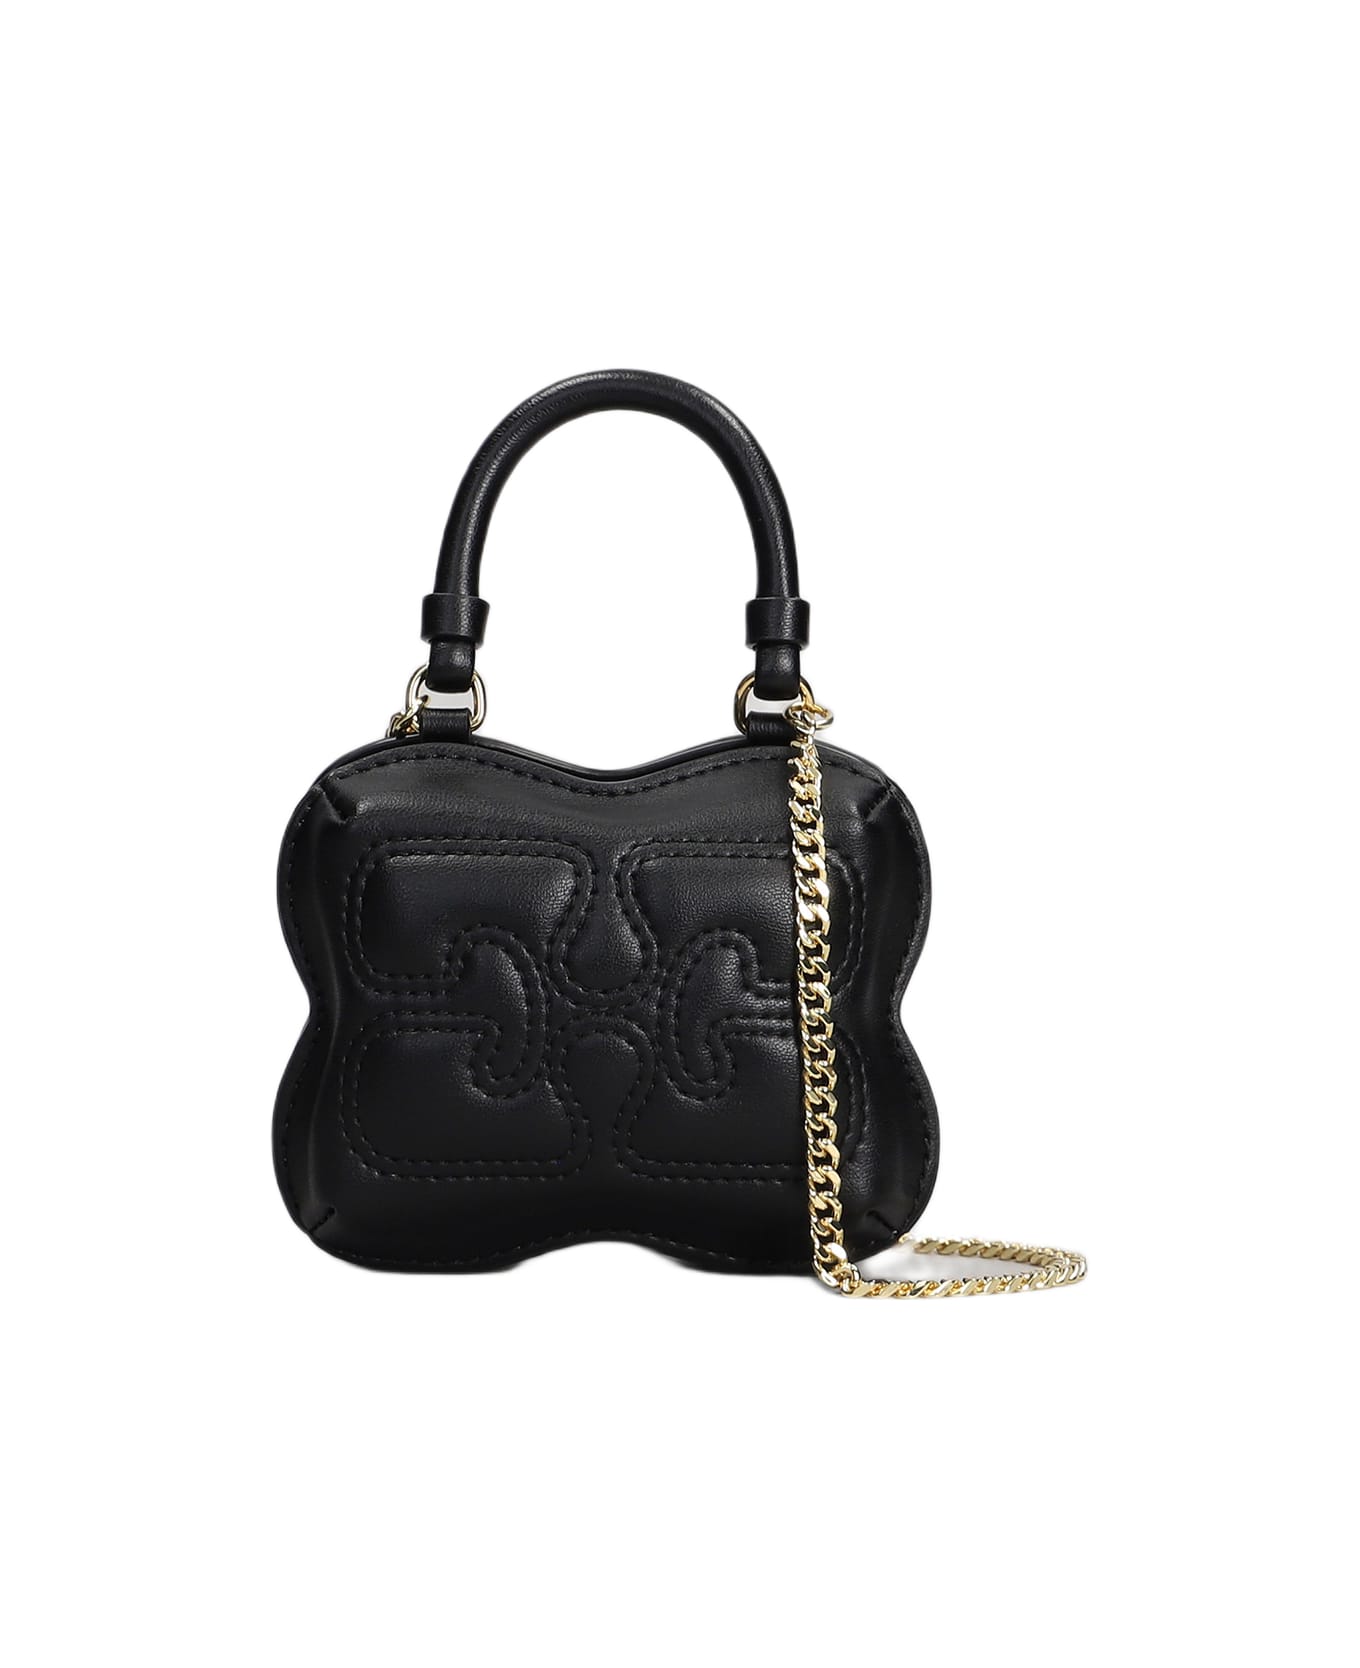 Ganni Butterfly Nano Hand Bag In Black Leather - black トートバッグ